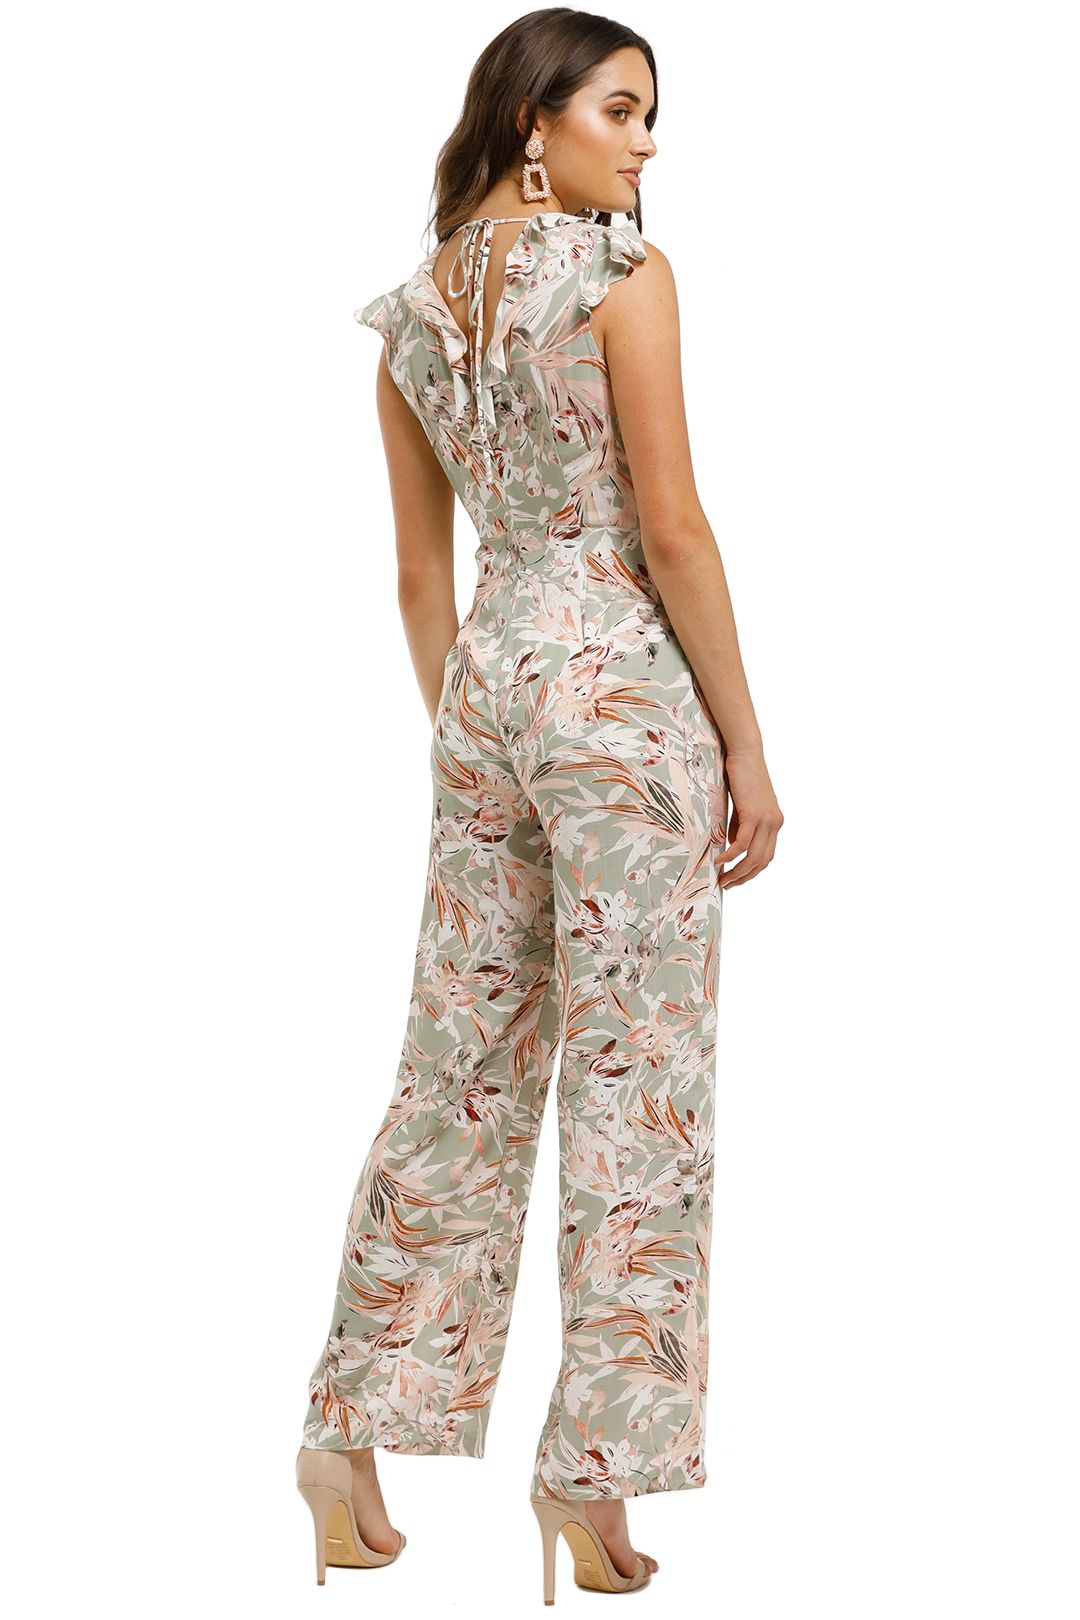 Palm Springs Jumpsuit by Wish for Hire | GlamCorner